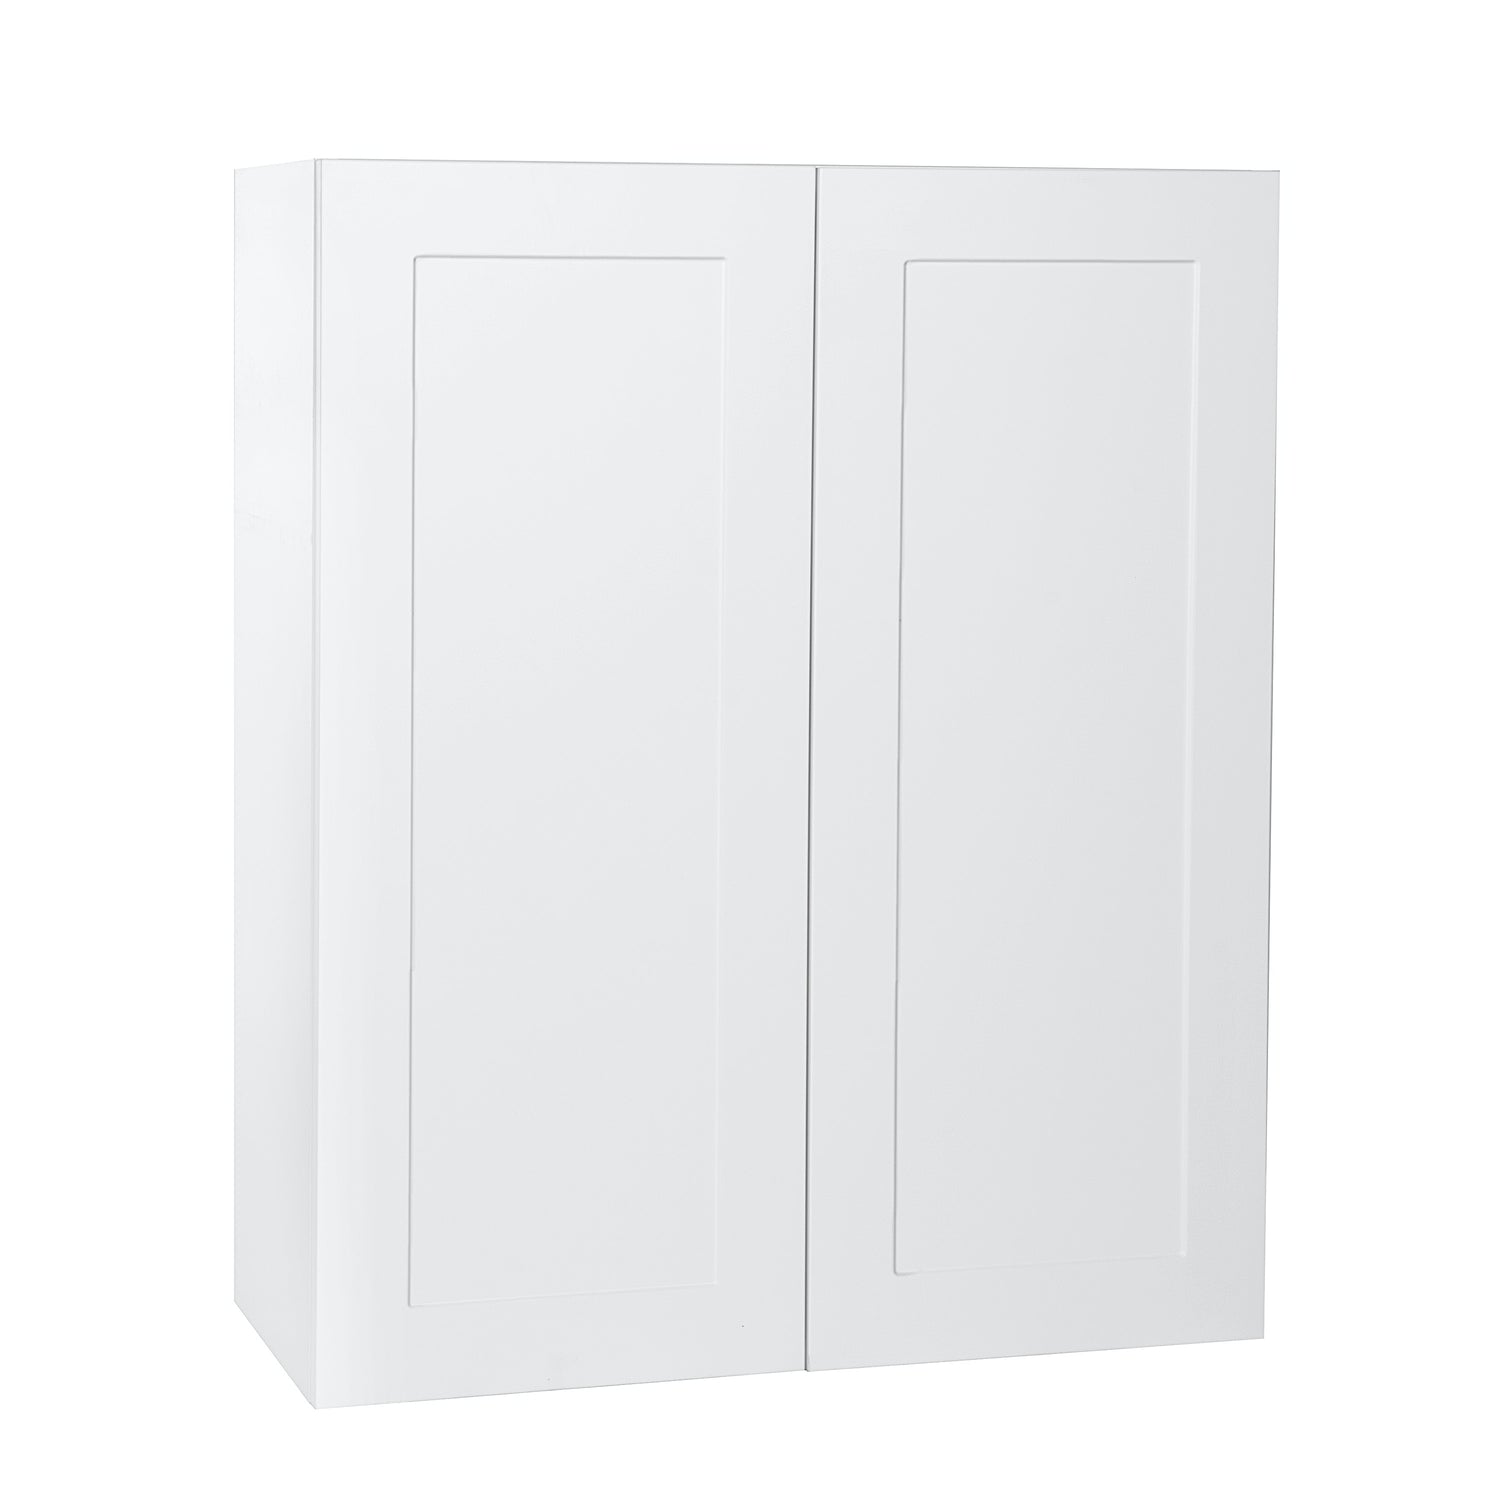 Quick Assemble Modern Style with Soft Close, White Shaker Wall Kitchen Cabinet, 2 Door (30 in W x 12 D x 36 in H) -  Pro-Edge HD